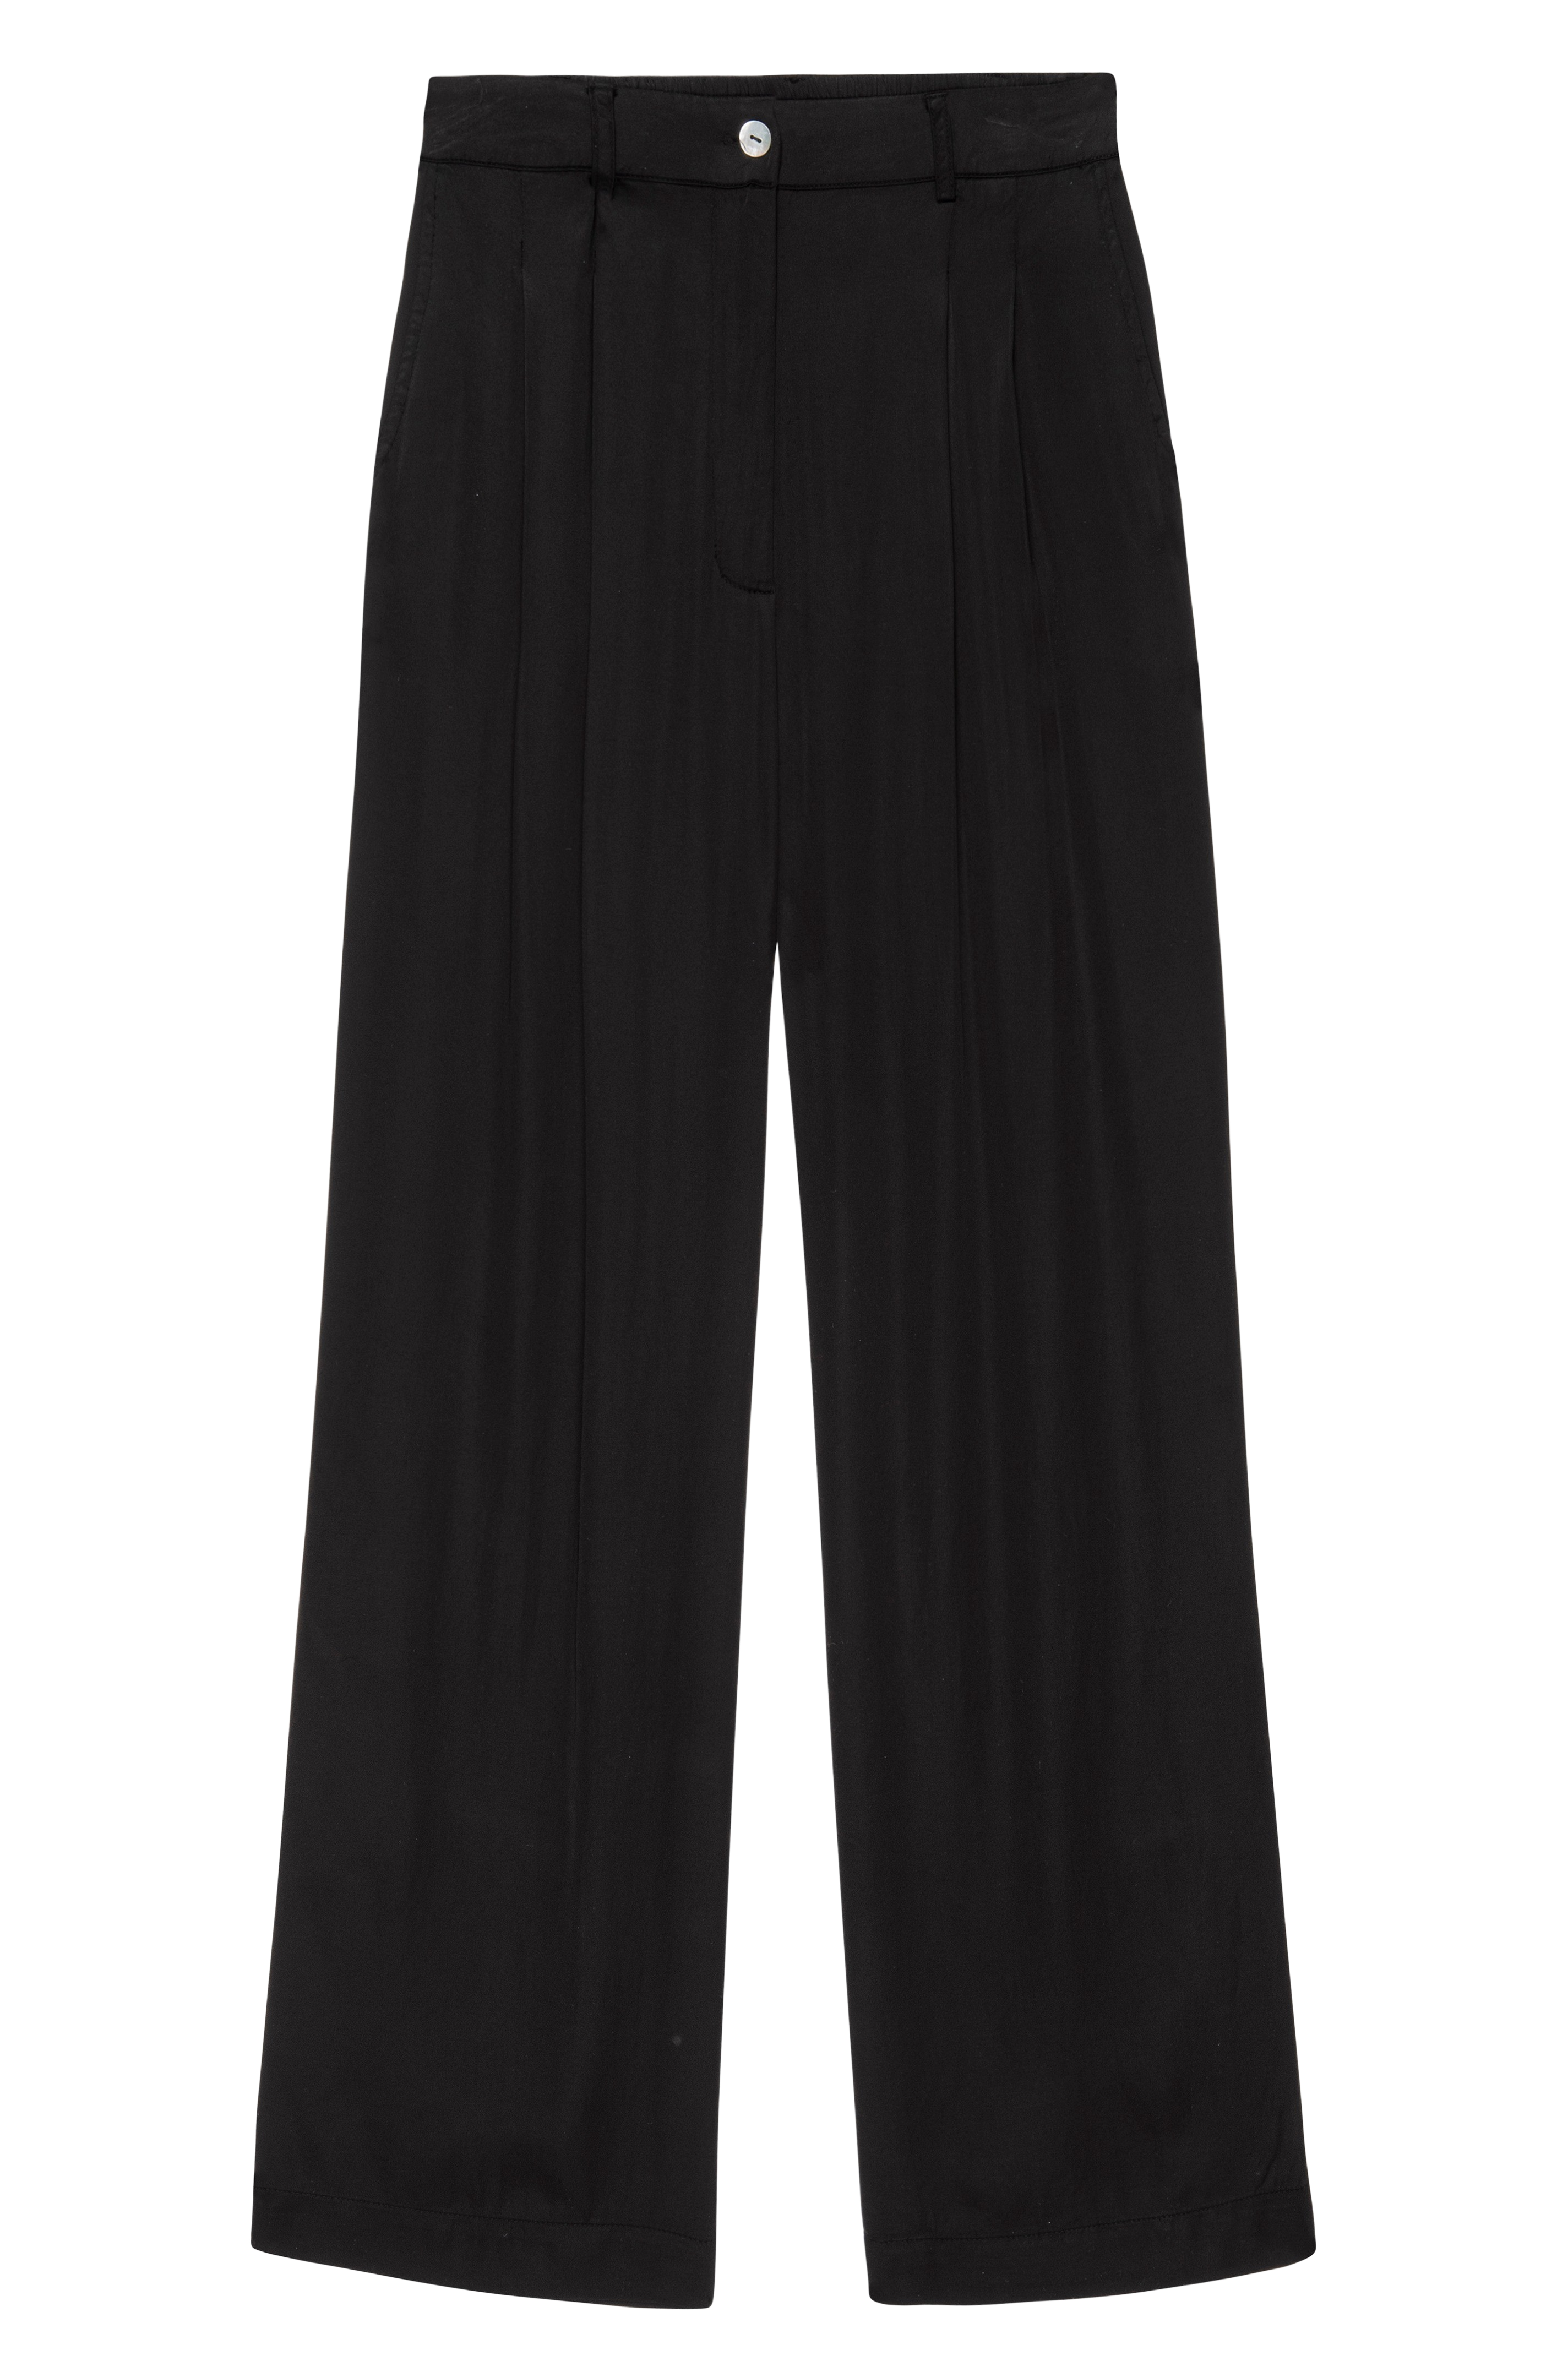 Black Pleated Trousers by Helmut Lang on Sale